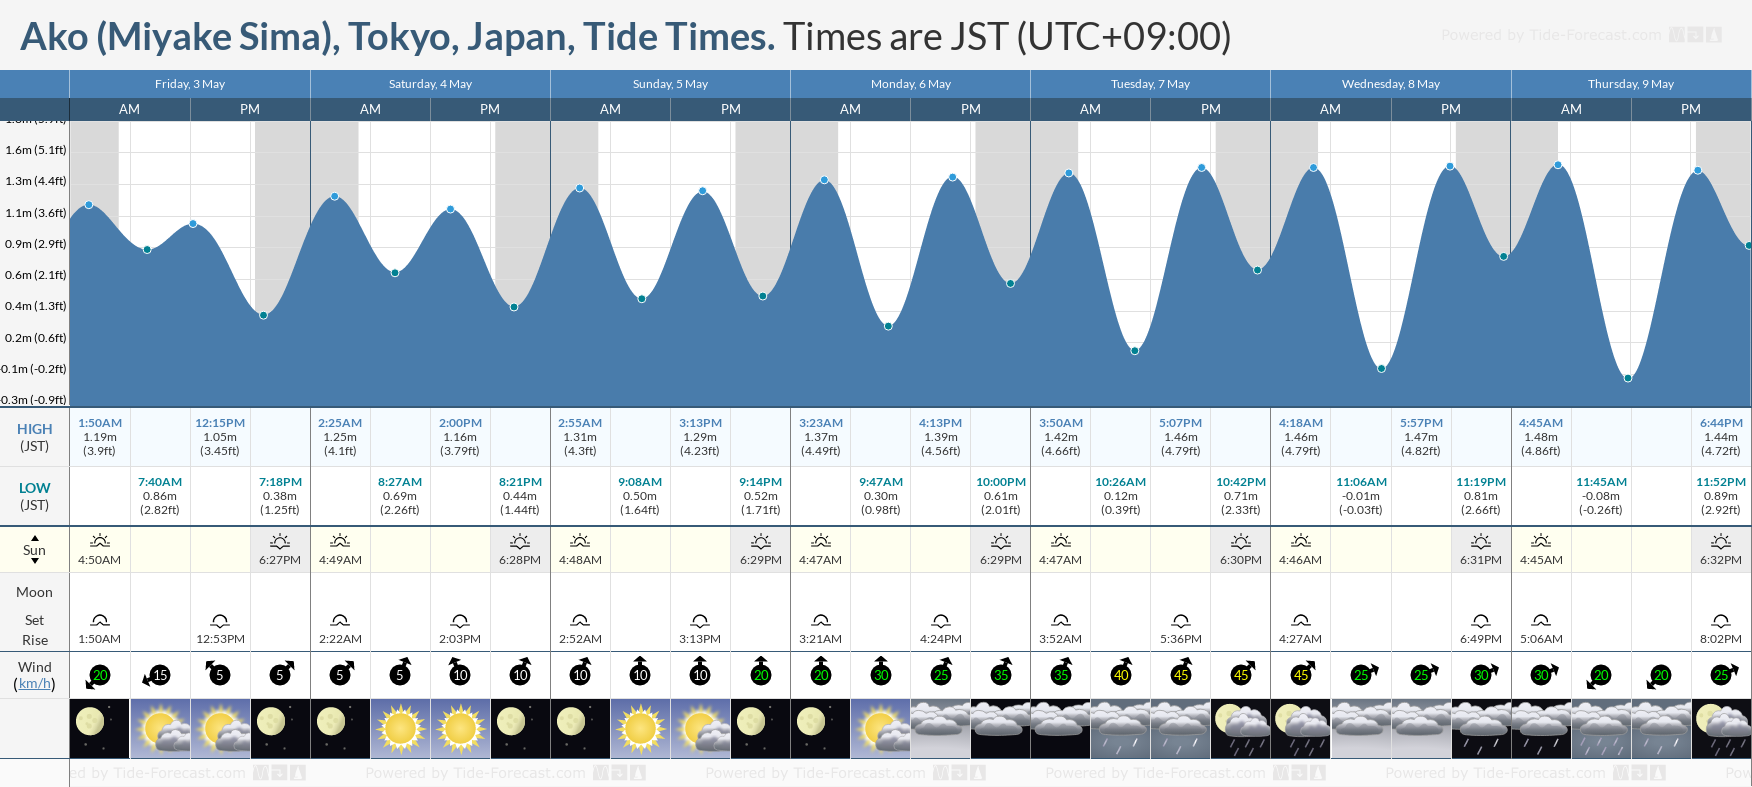 Ako (Miyake Sima), Tokyo, Japan Tide Chart including high and low tide tide times for the next 7 days